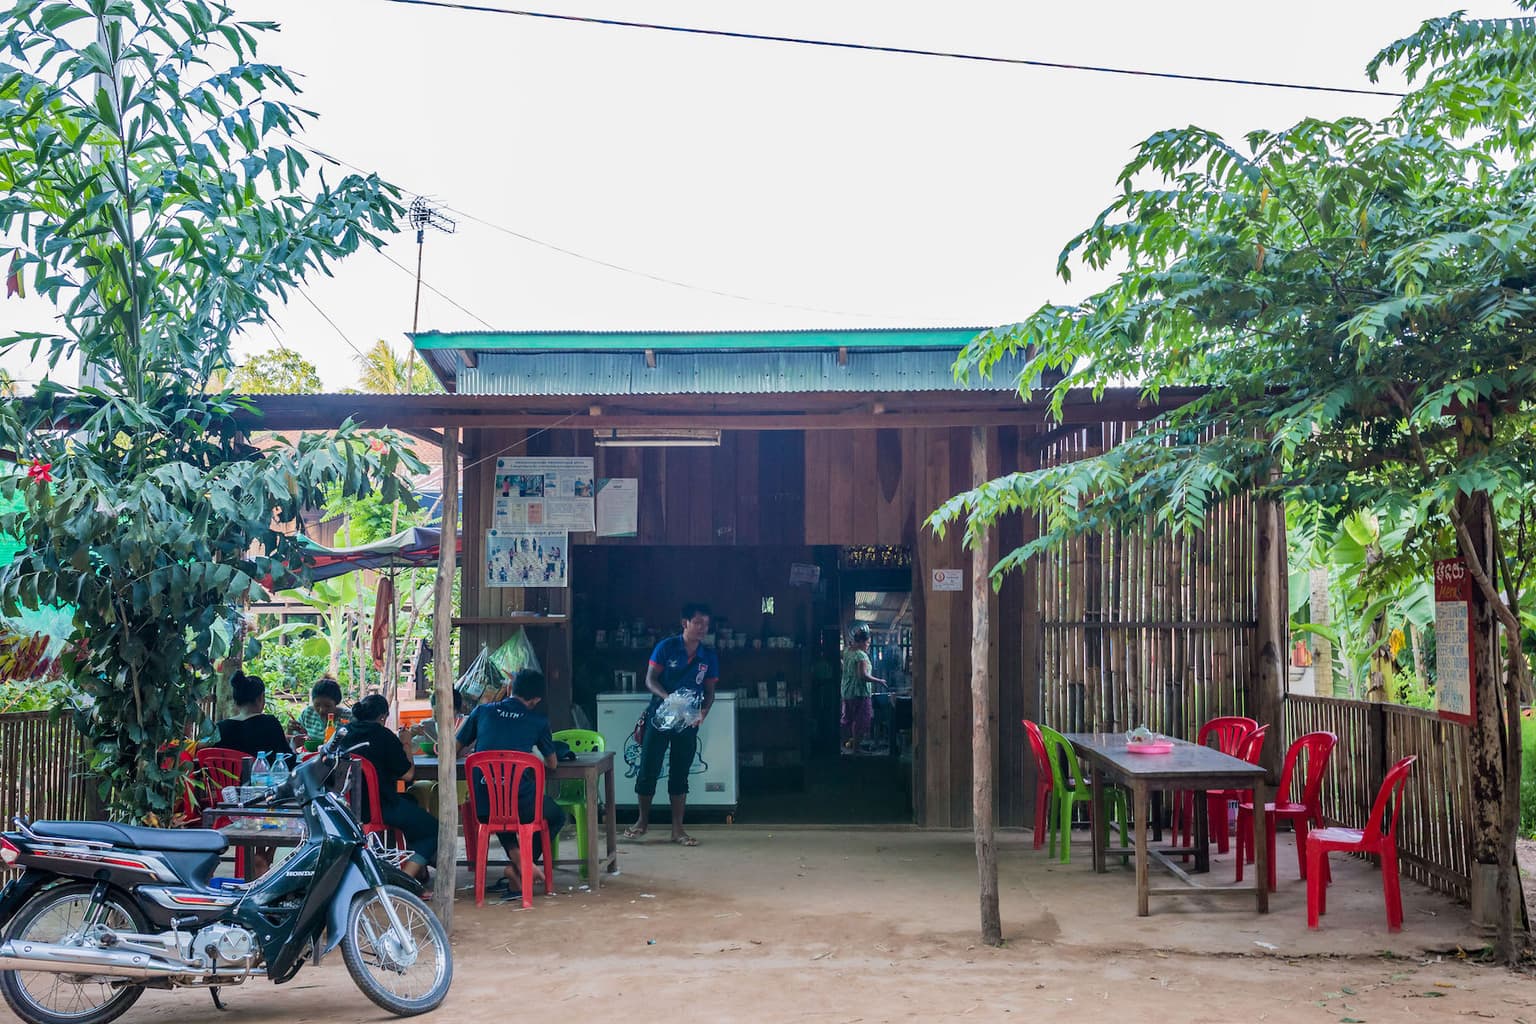 Small market in the wild east of Cambodia